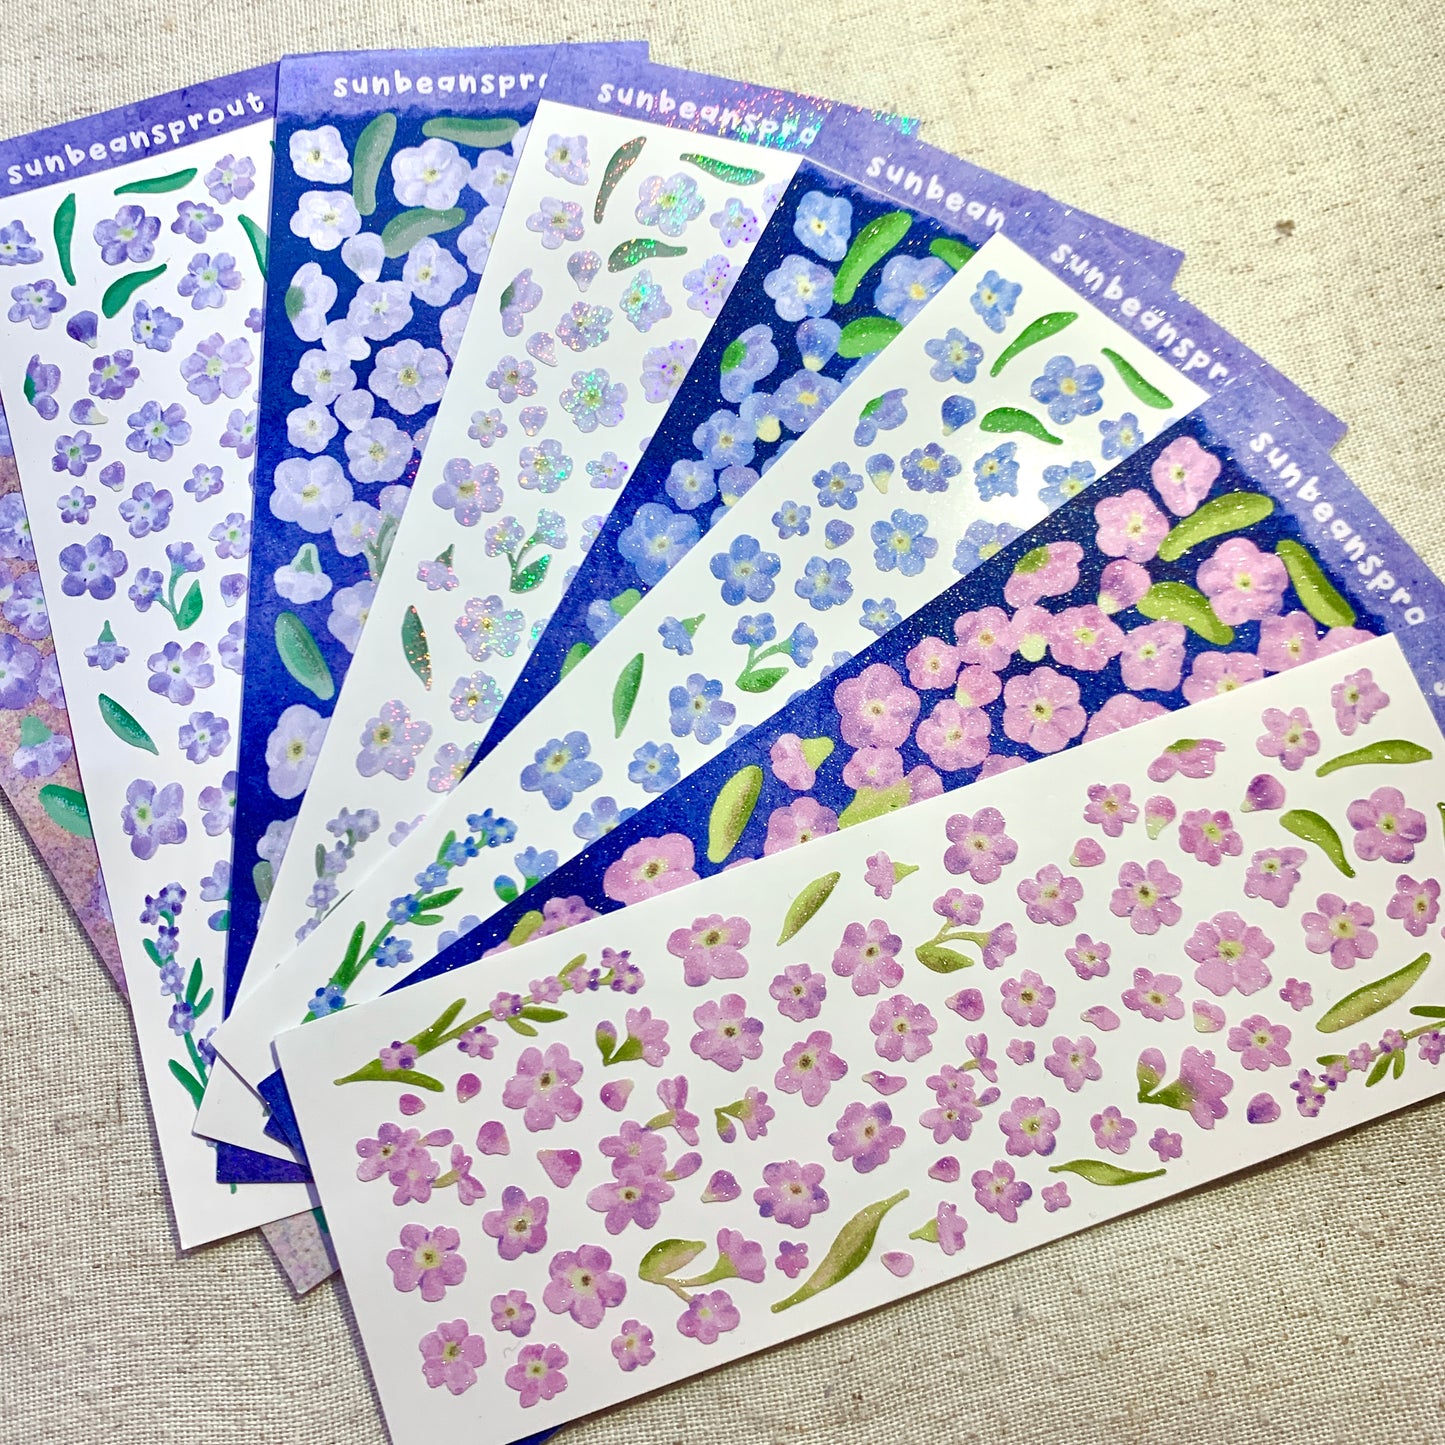 Glitter Holographic Stickers